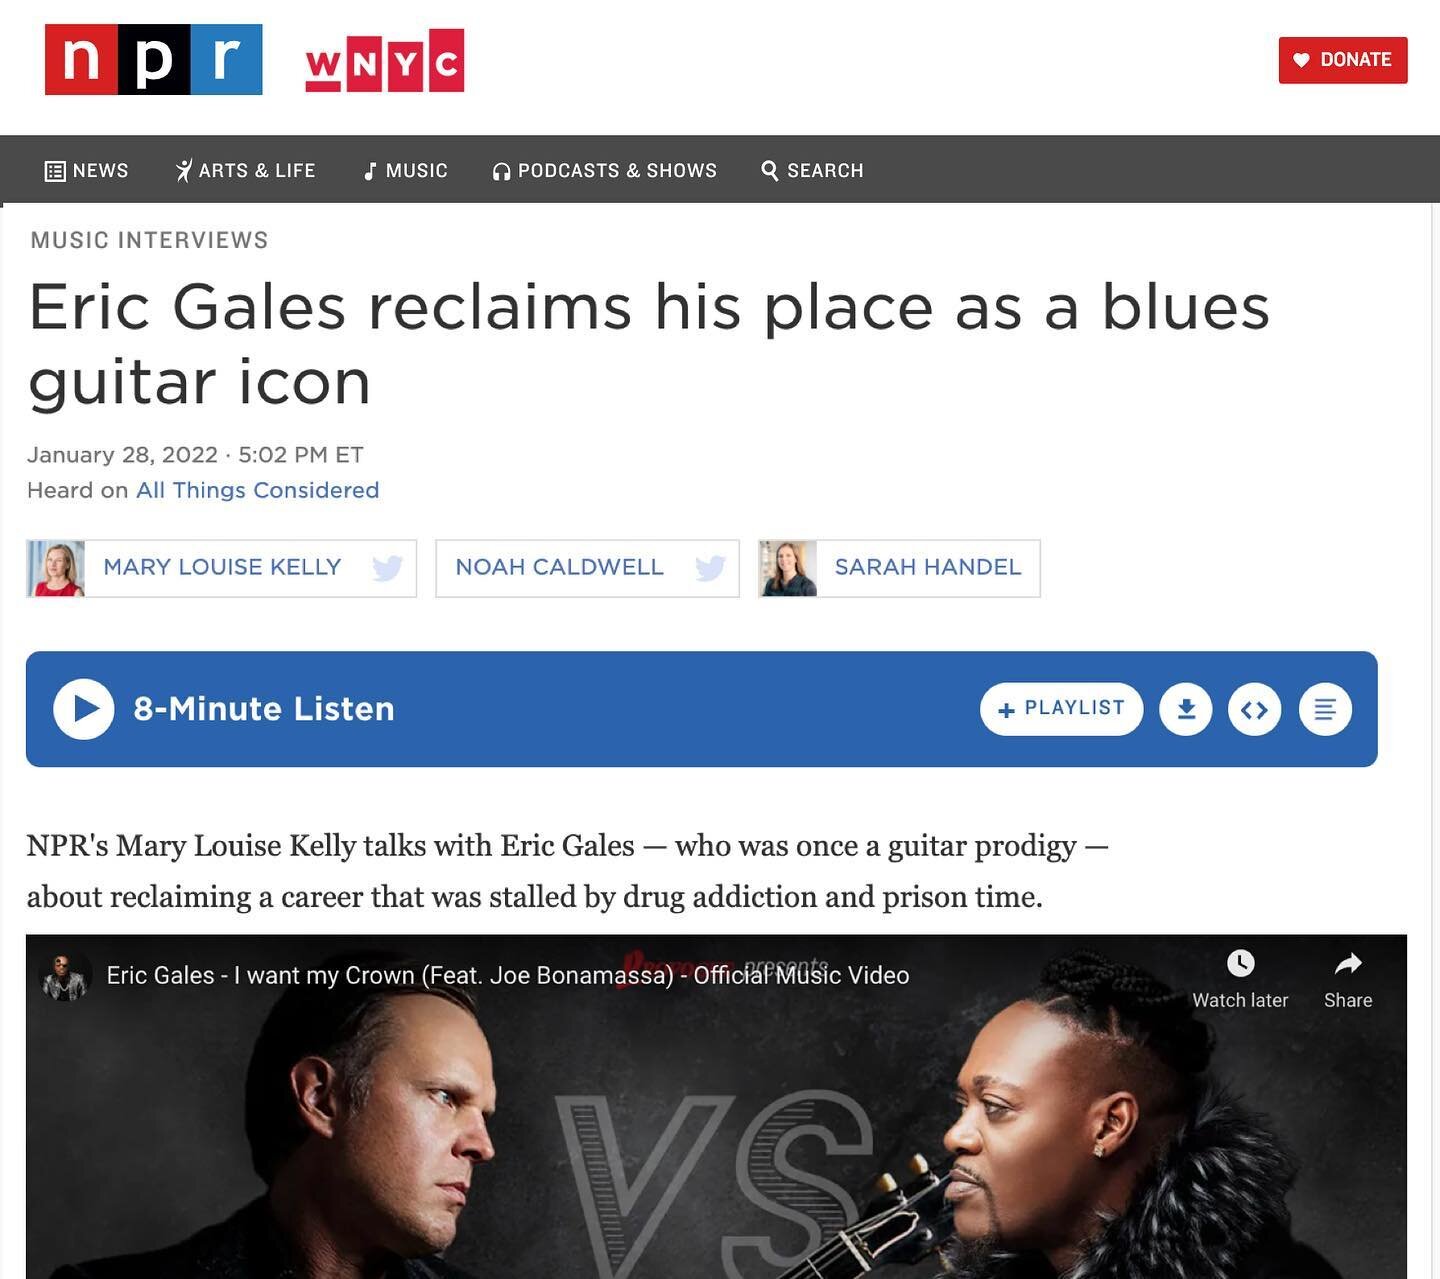 &ldquo;Now, Eric Gales is five years sober and out with a new album called &lsquo;Crown,&rsquo; a not-so-subtle hint that he is ready to reclaim his place as a blues guitar icon. &lsquo;It's really a miracle for me to even be sitting here having a co